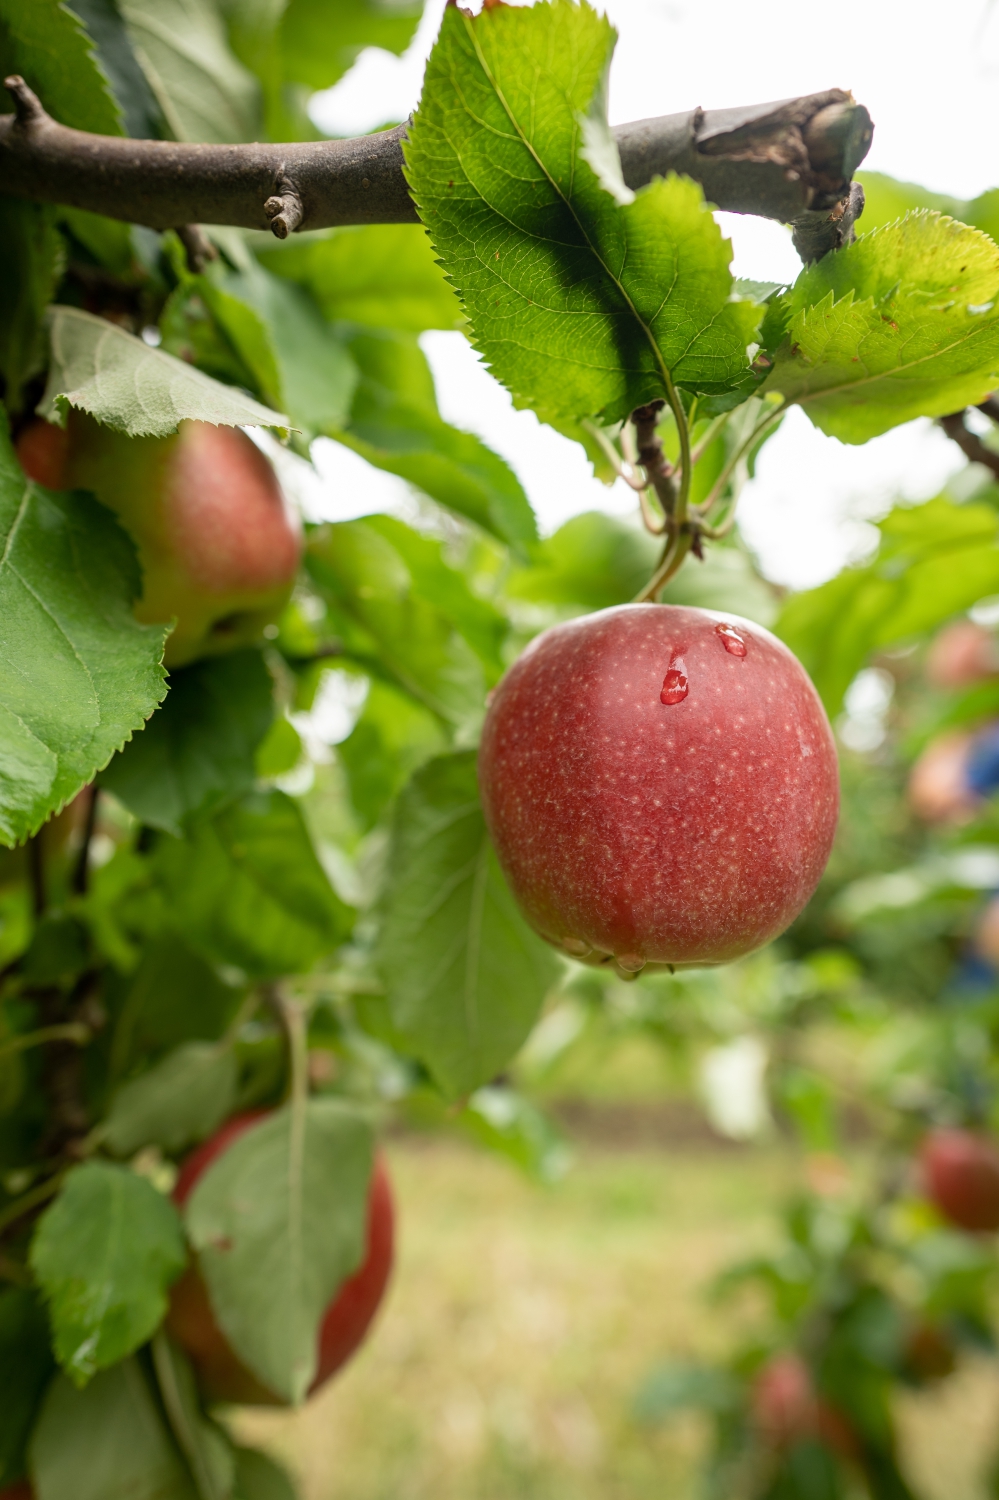 Growing apples and pears organically under hail nets, what are the ins and outs?